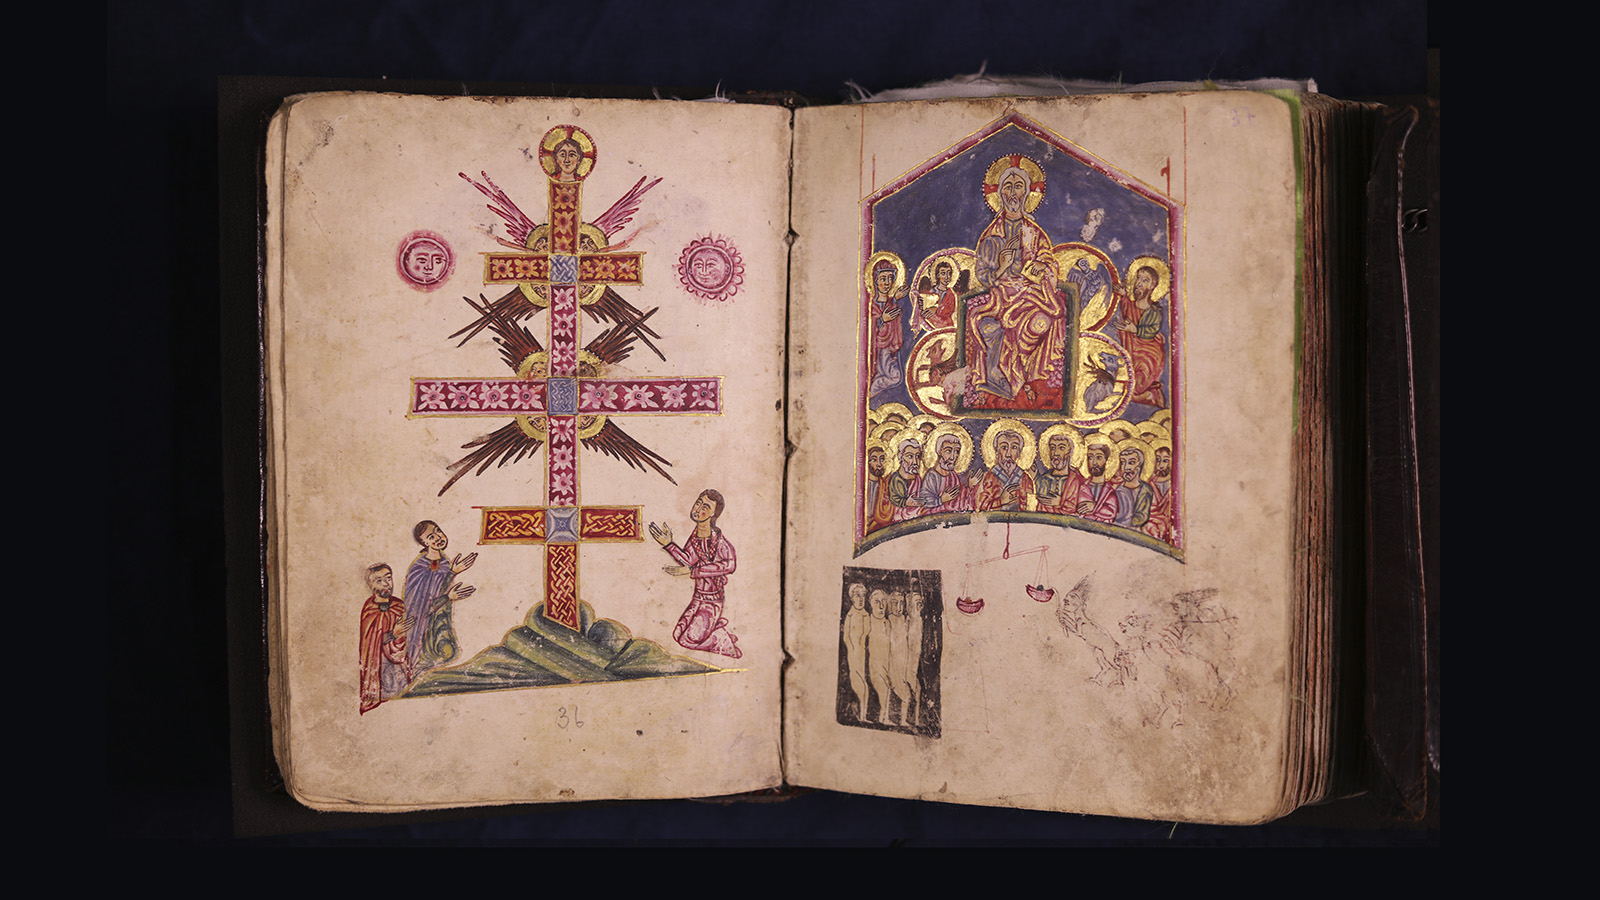 Cross symbolizing the Second Coming of Christ; and the Final Judgment. Gospel Book. Minas (illuminator), Father David (copyist), Archesh (Armenia), 1455. Armenian Patriarchate of Jerusalem, St. Theodoros Manuscript Library, inv. N3815.